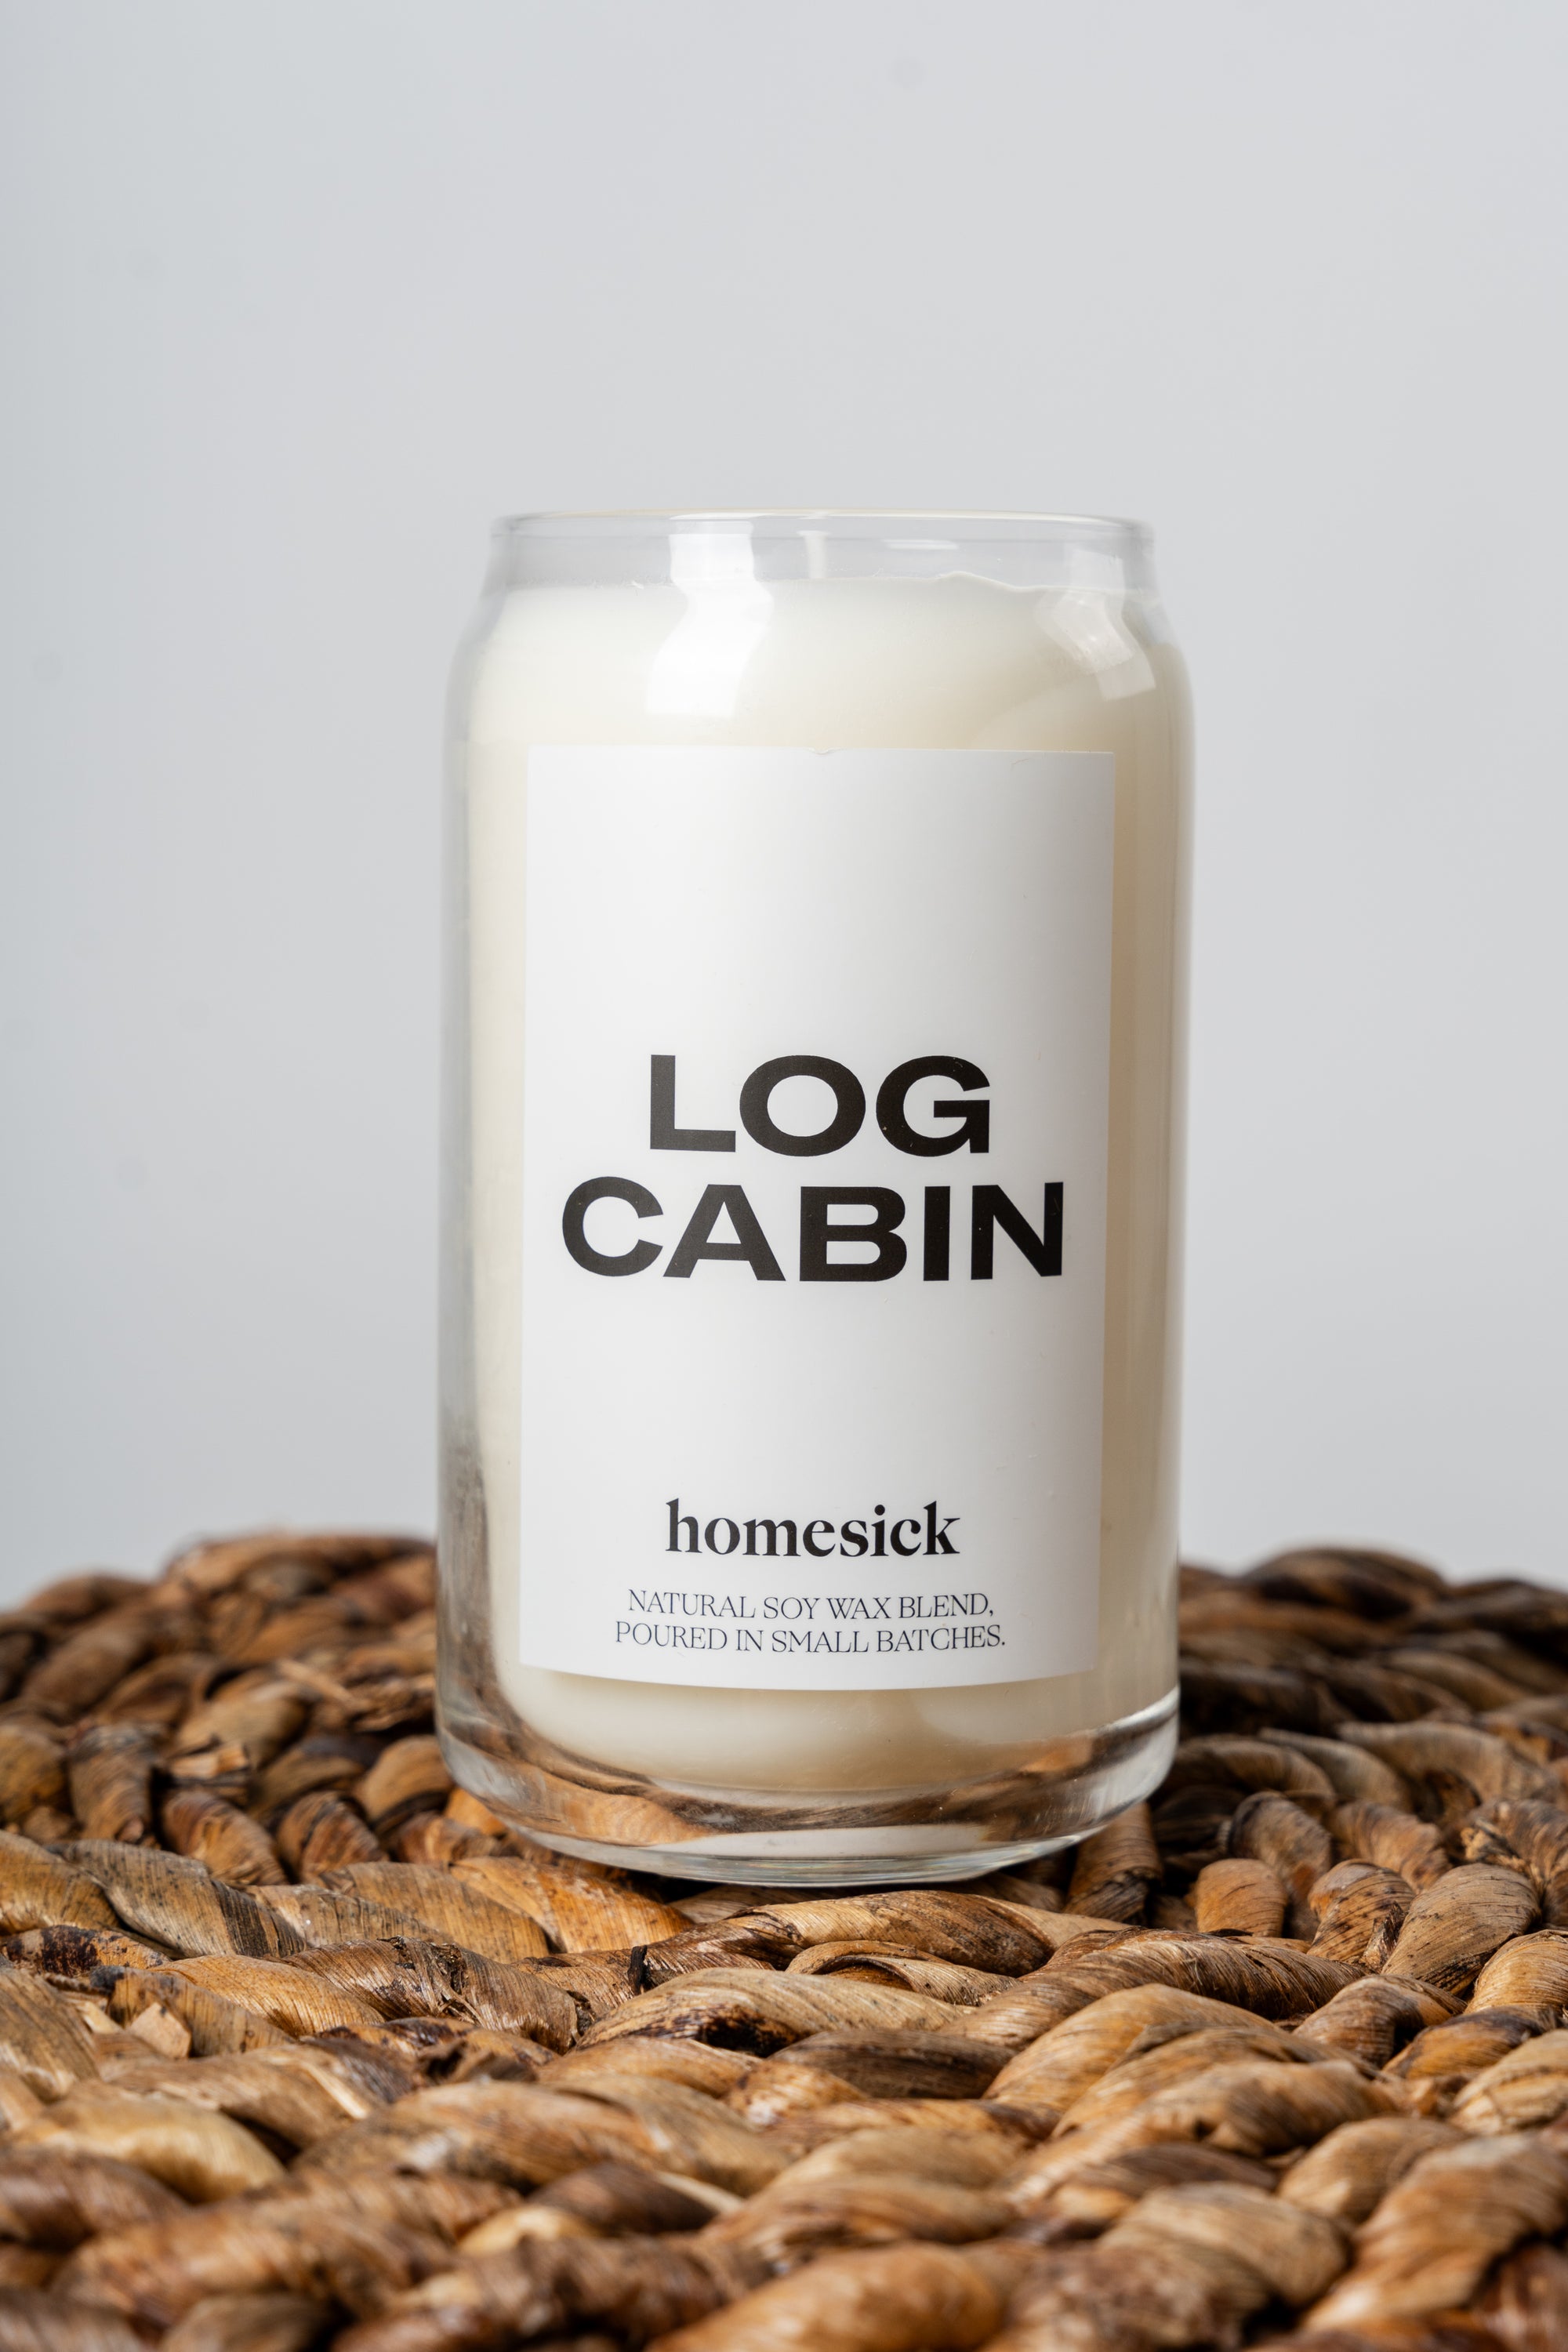 Homesick Log Cabin candle - Trendy Candles at Lush Fashion Lounge Boutique in Oklahoma City